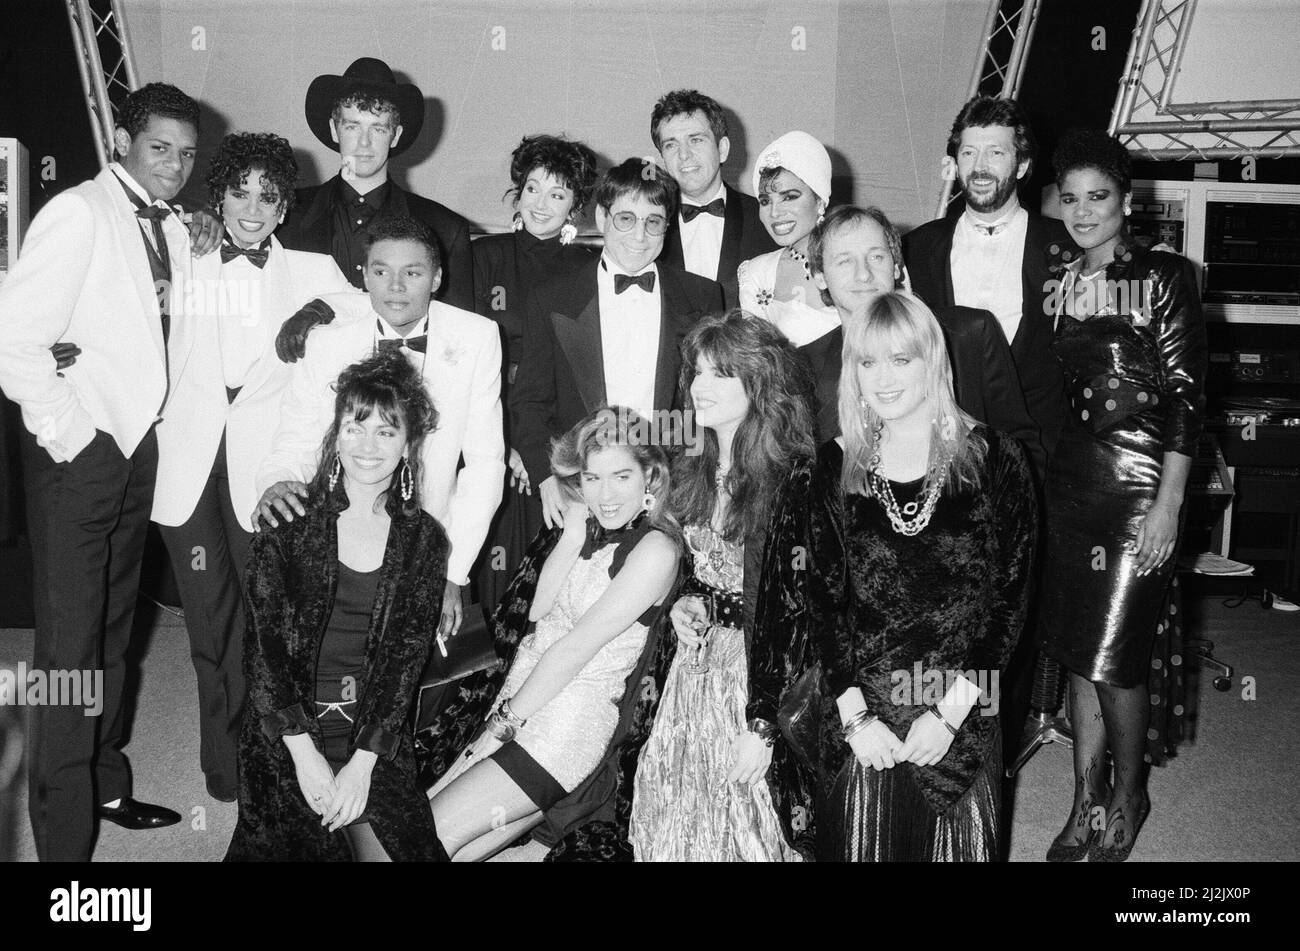 The BPI Award Winners 1987. The British Phonographic Industry award ceremony at The Grosvenor House, London, on 9th February 1987.  Winners pictured  are :  Best British Male Solo Artist - Peter Gabriel. (back row bow tie, next to Kate Bush) Best British Video - Peter Gabriel for Sledgehammer  Best British Female Solo Artist - Kate Bush (back row, black dress, next to Peter Gabriel) Best British Single - The Pet Shop Boys (Neil Tennent - back row in hat) Best British Group - Five Star (in the white dinner jackets, white hat, and dark dress next to Eric Clapton) Best International Group - The B Stock Photo